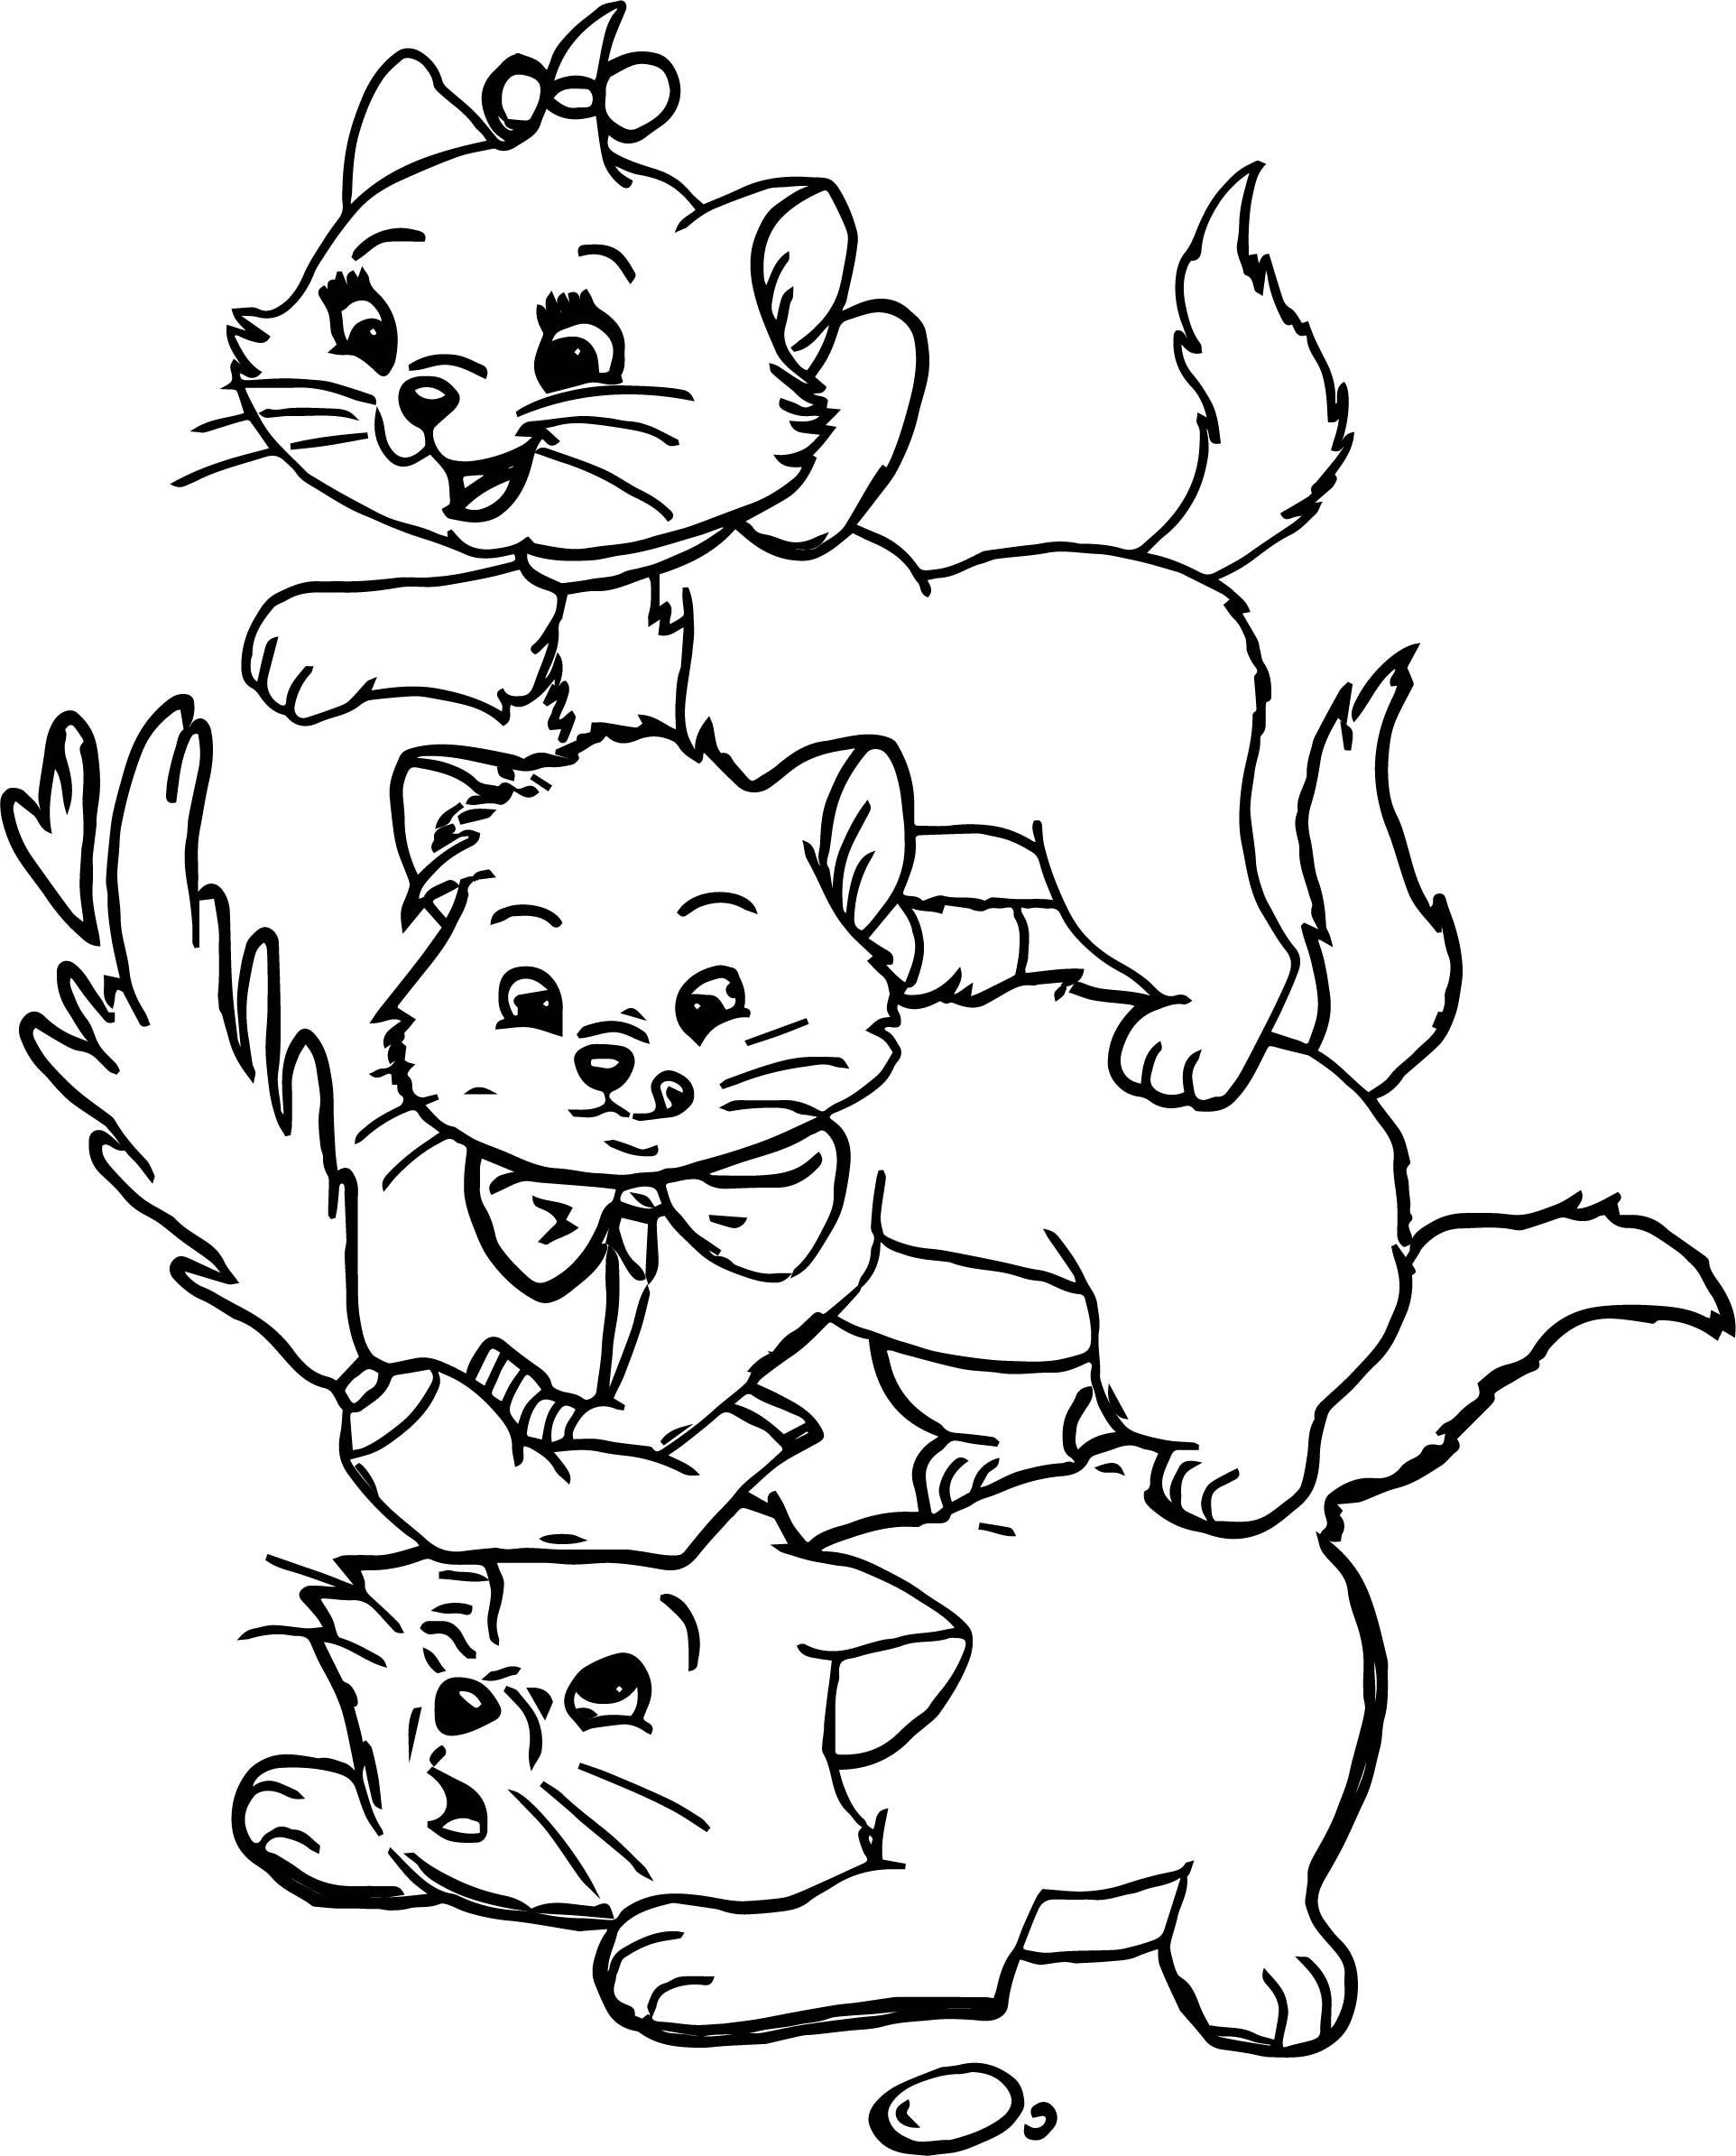 Aristocats Marie Coloring Pages at GetColorings.com | Free printable